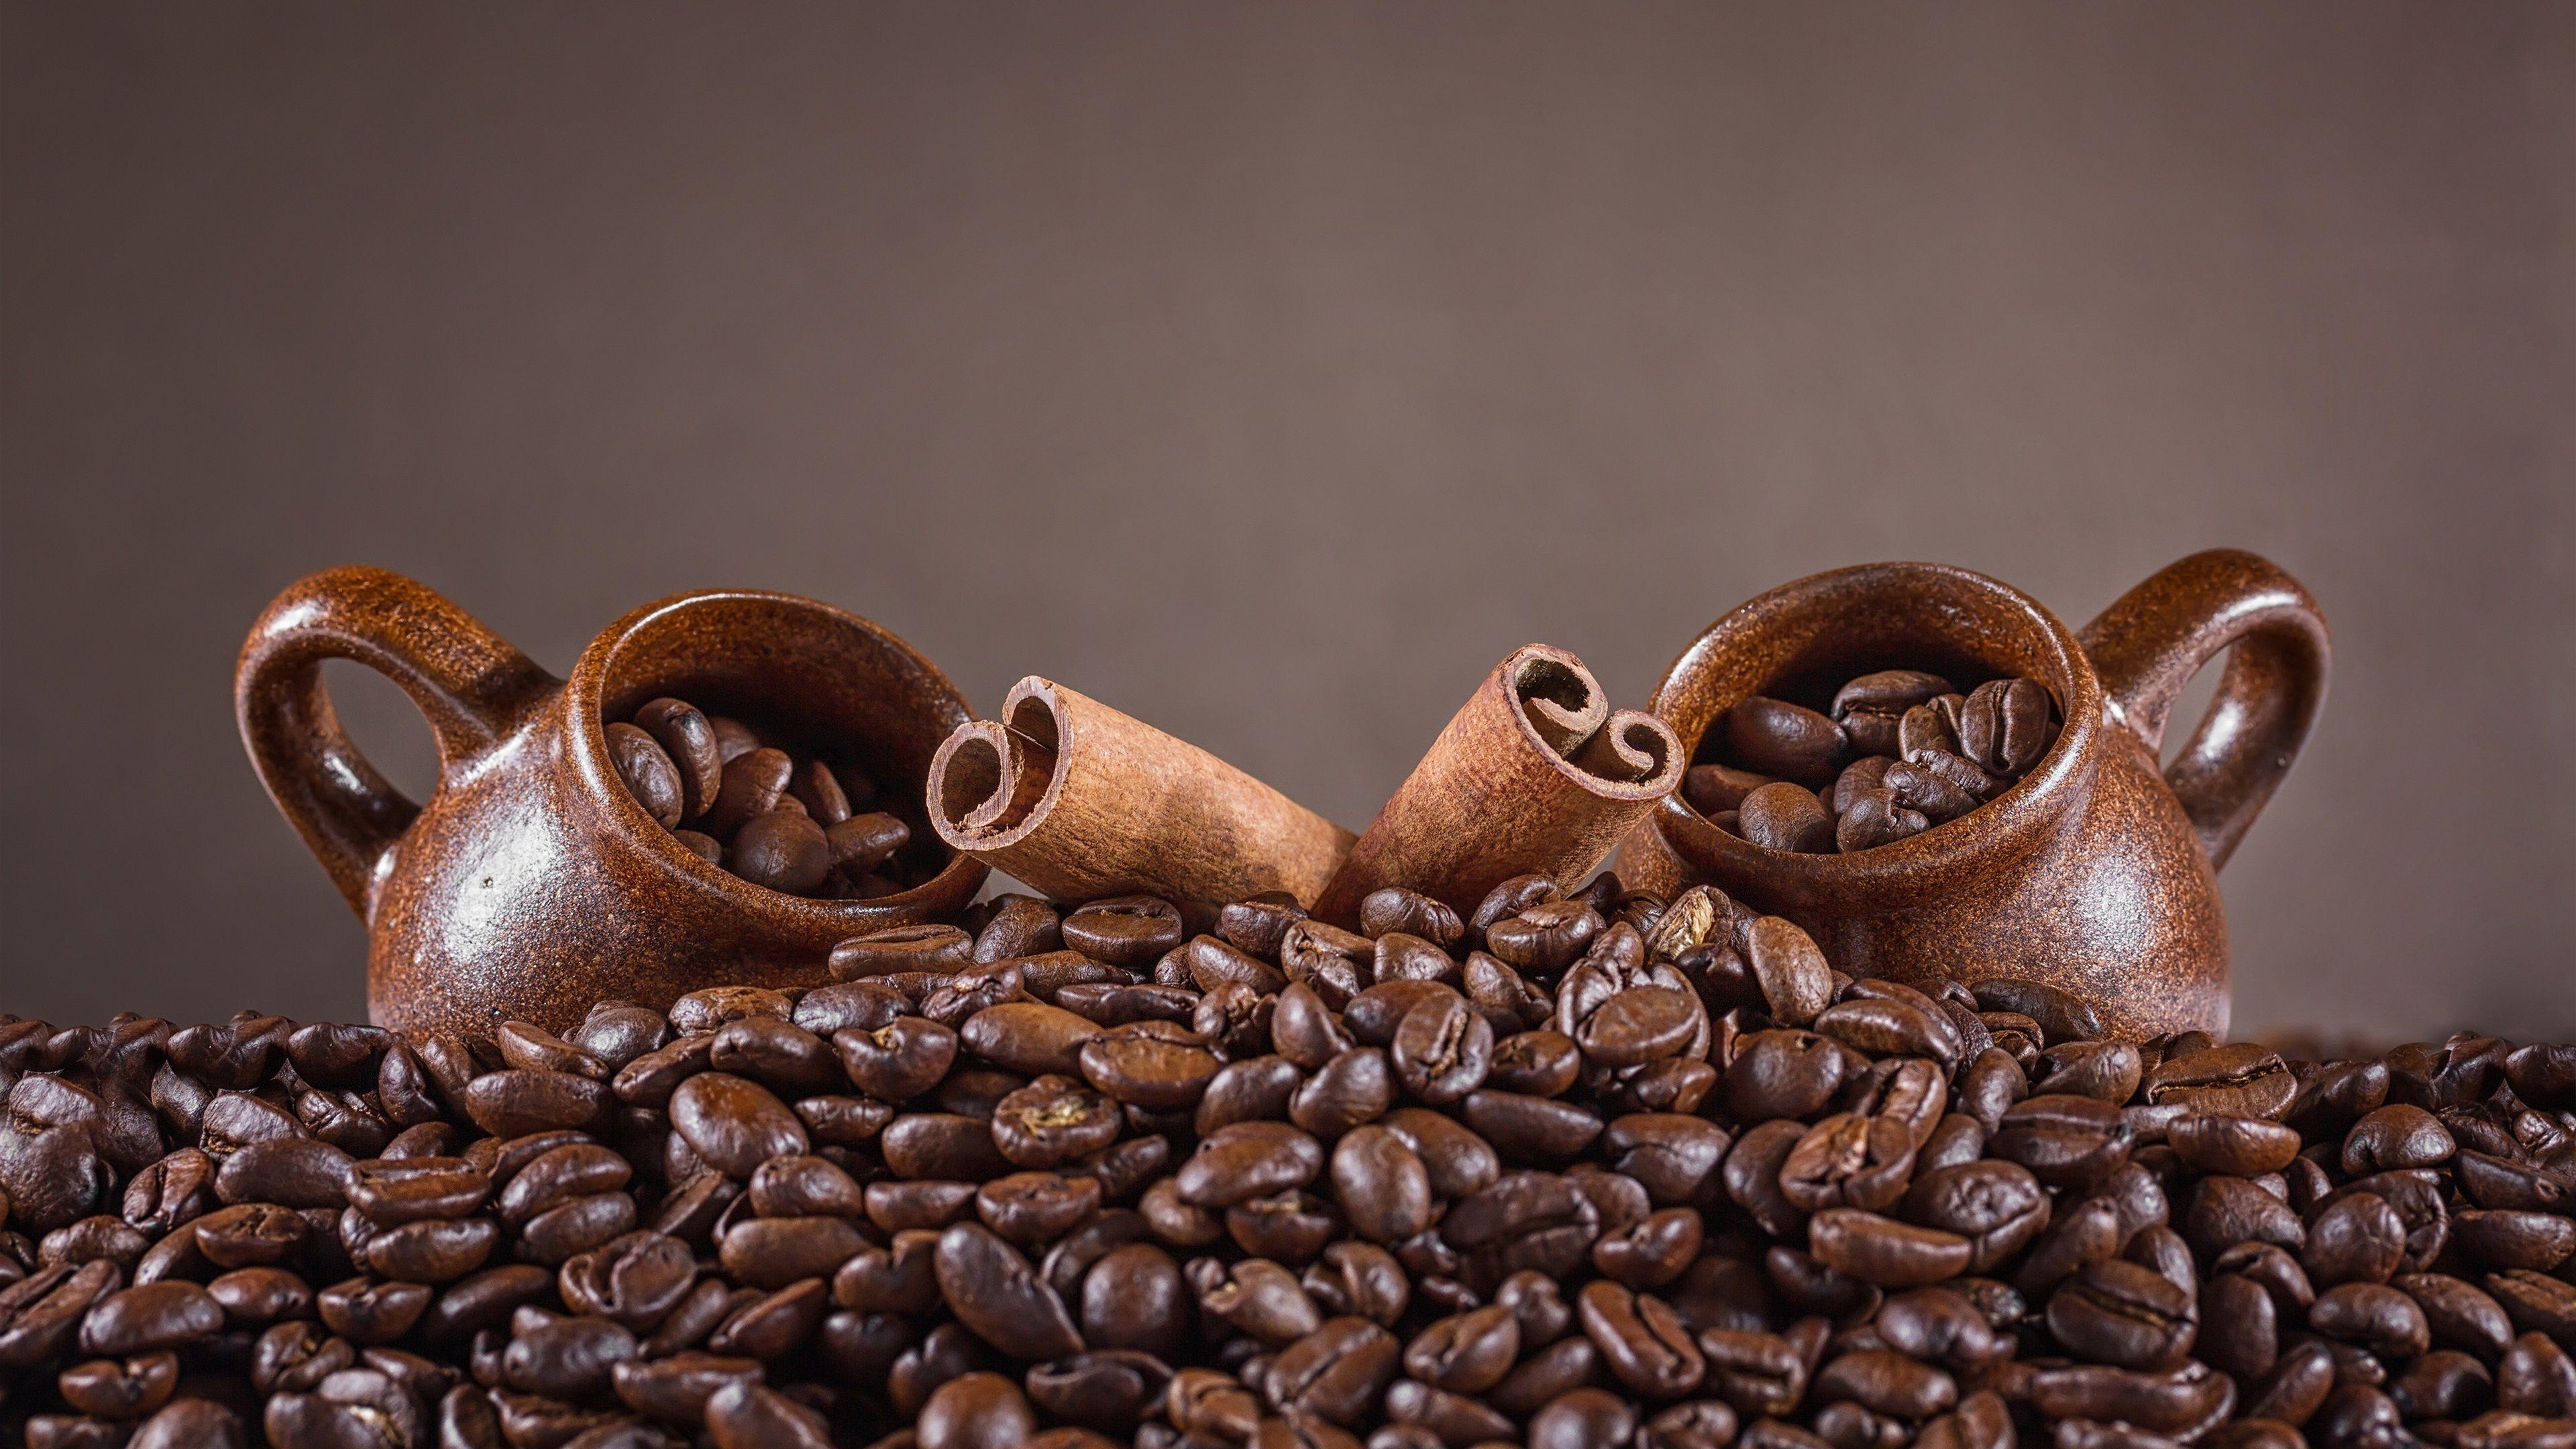 Wallpaper Coffee beans, cups, cinnamon 3840x2160 UHD 4K Picture, Image